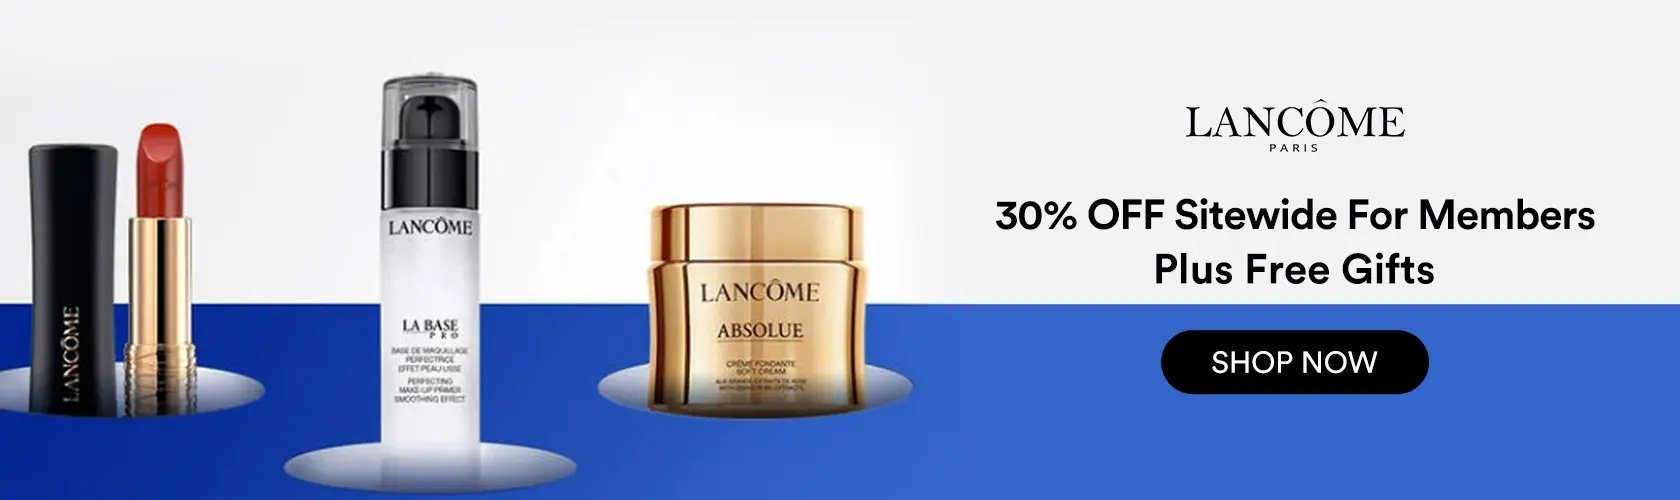 Lancome: 30% OFF Sitewide For Members + Free Gift